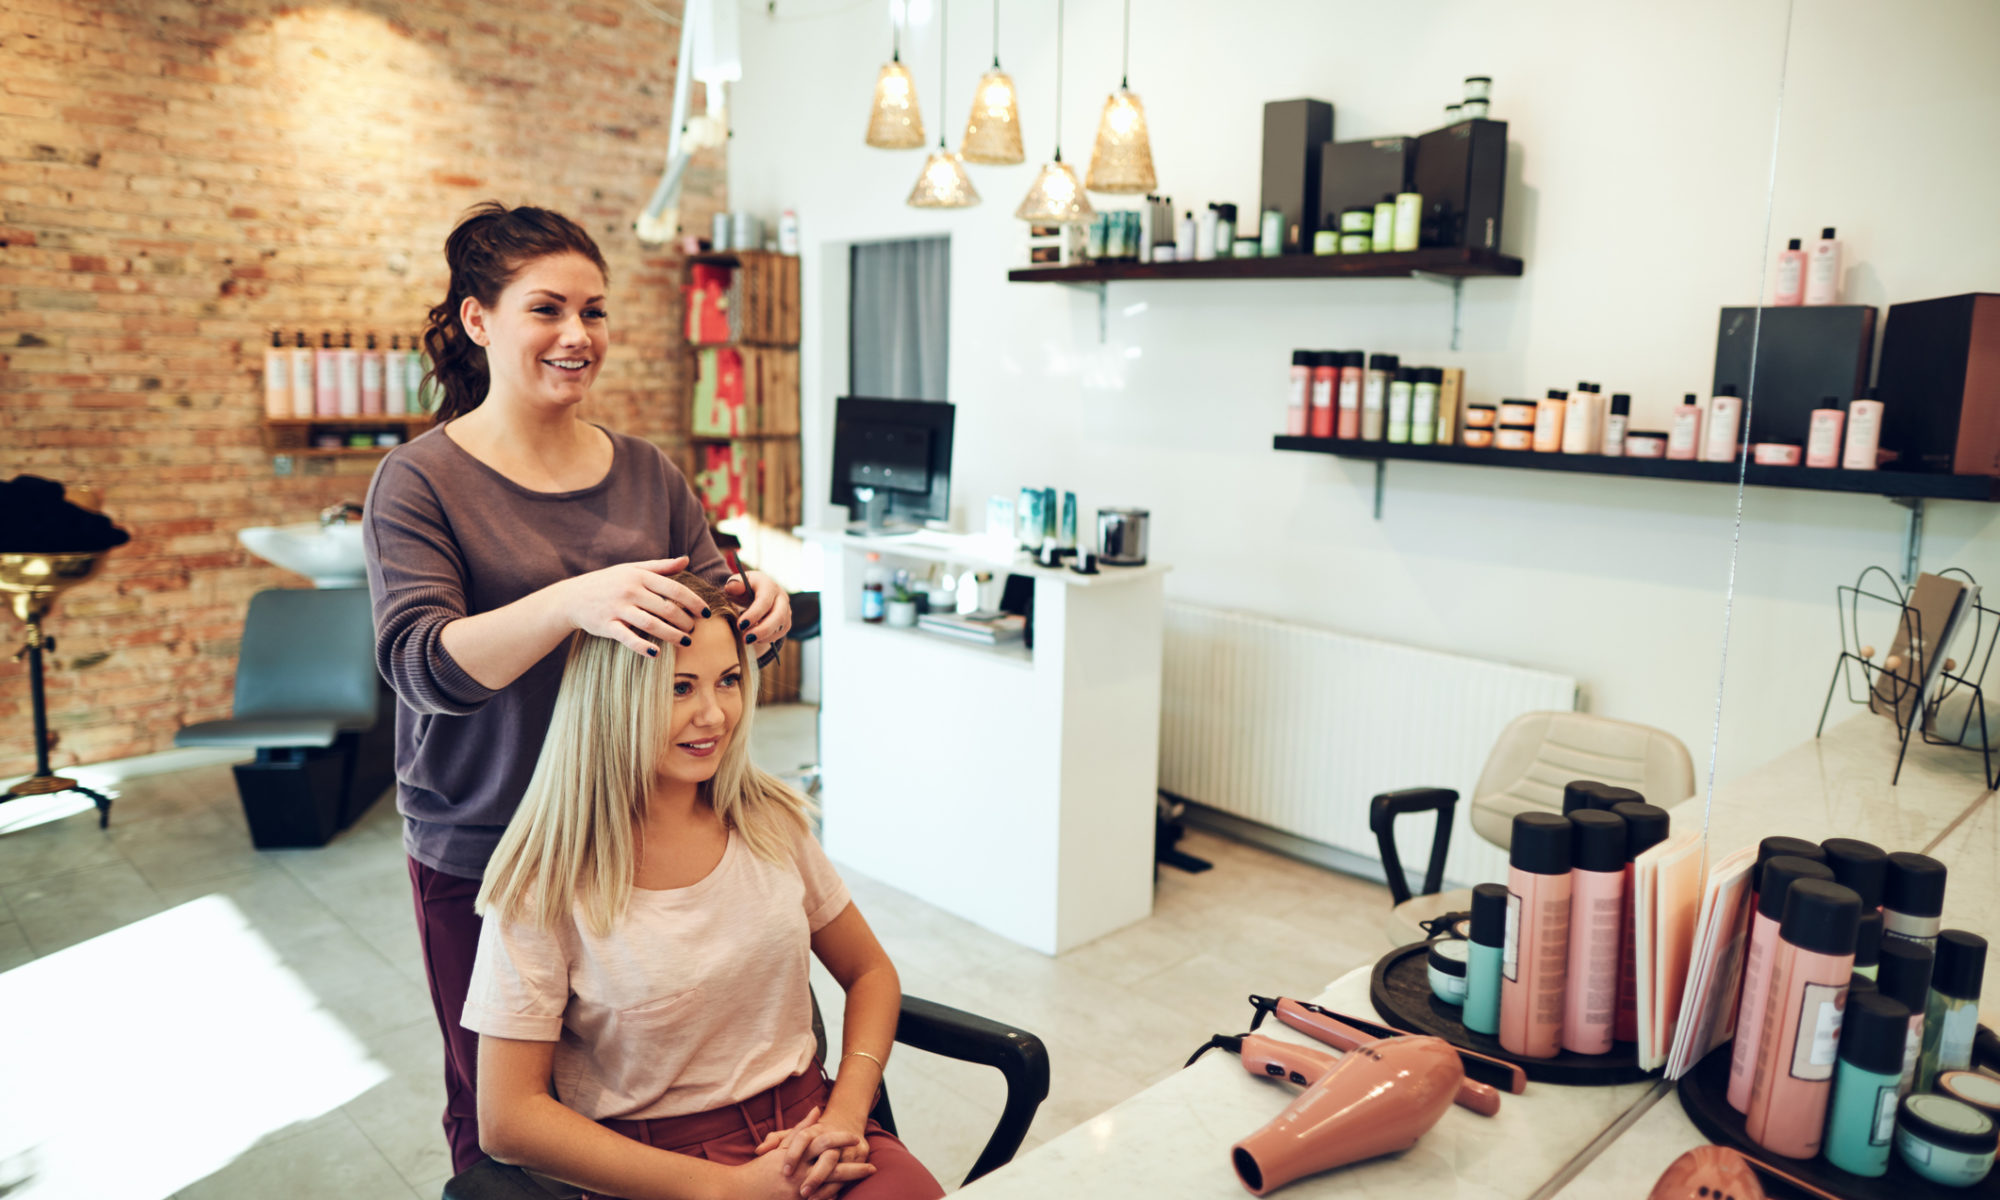 How Many Beauty Salons Offer Hair Coloring Services? post thumbnail image